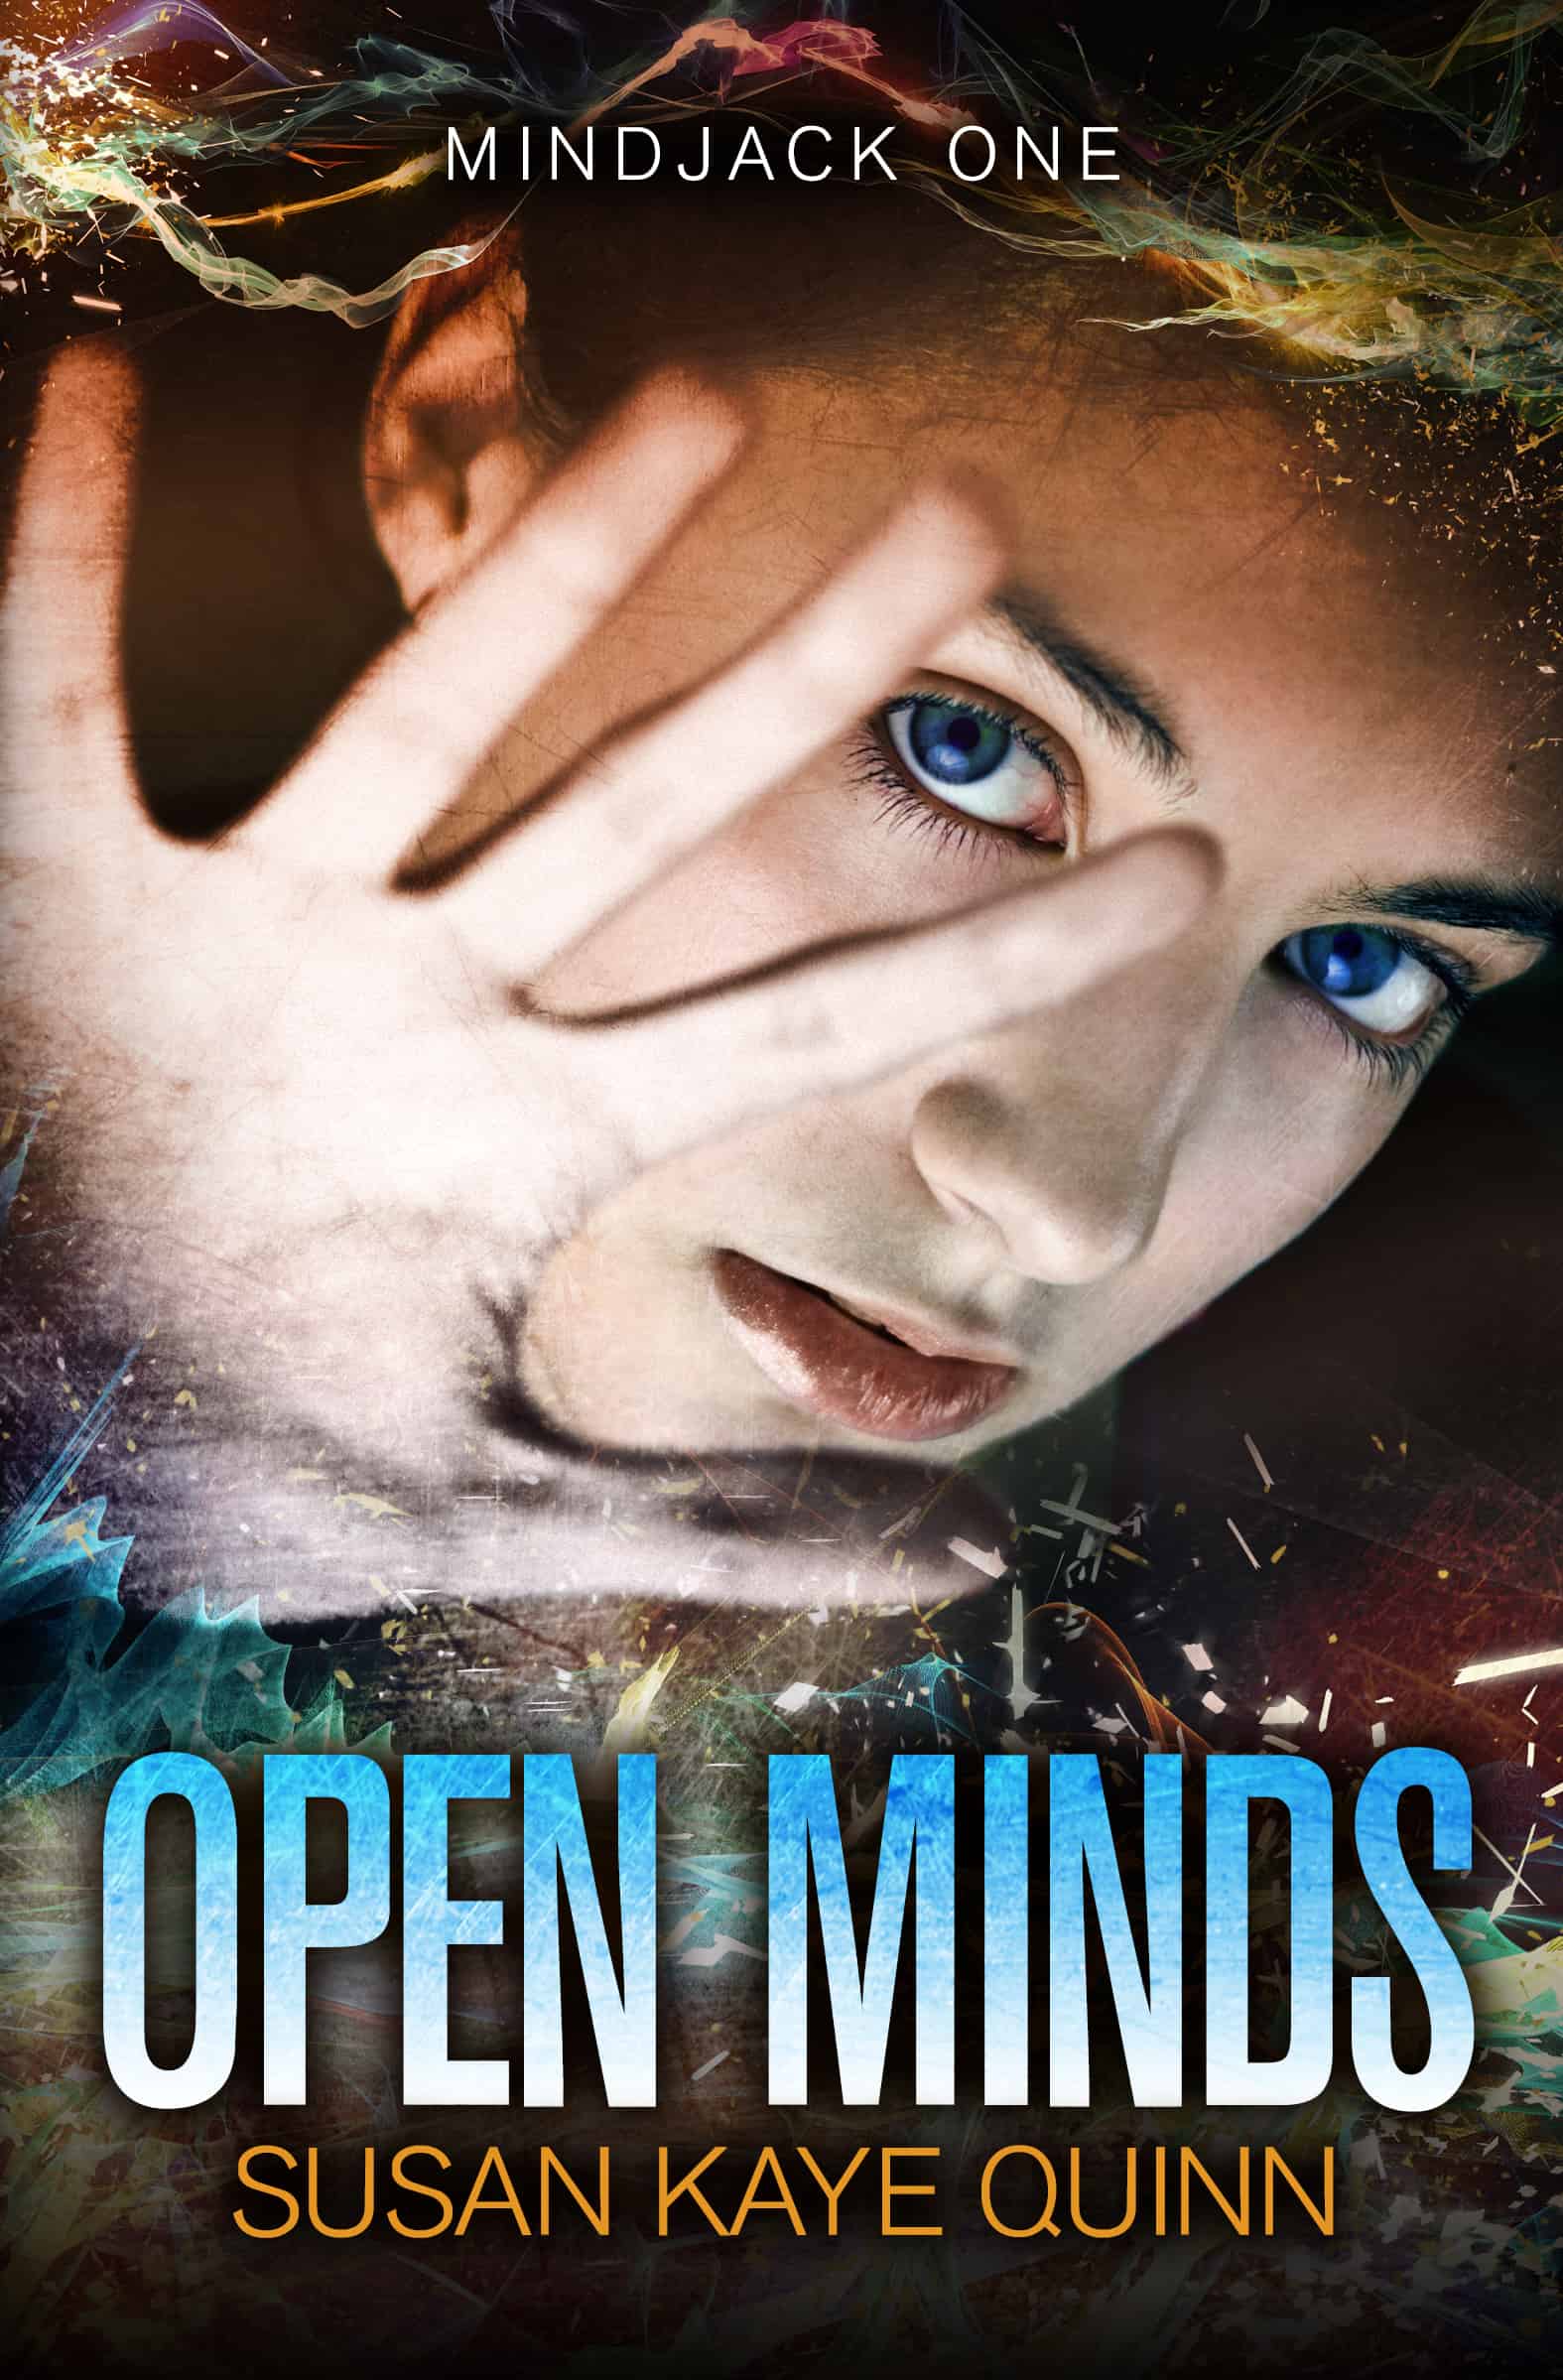 Cover for Open Minds (Mindjack Series Book 1)